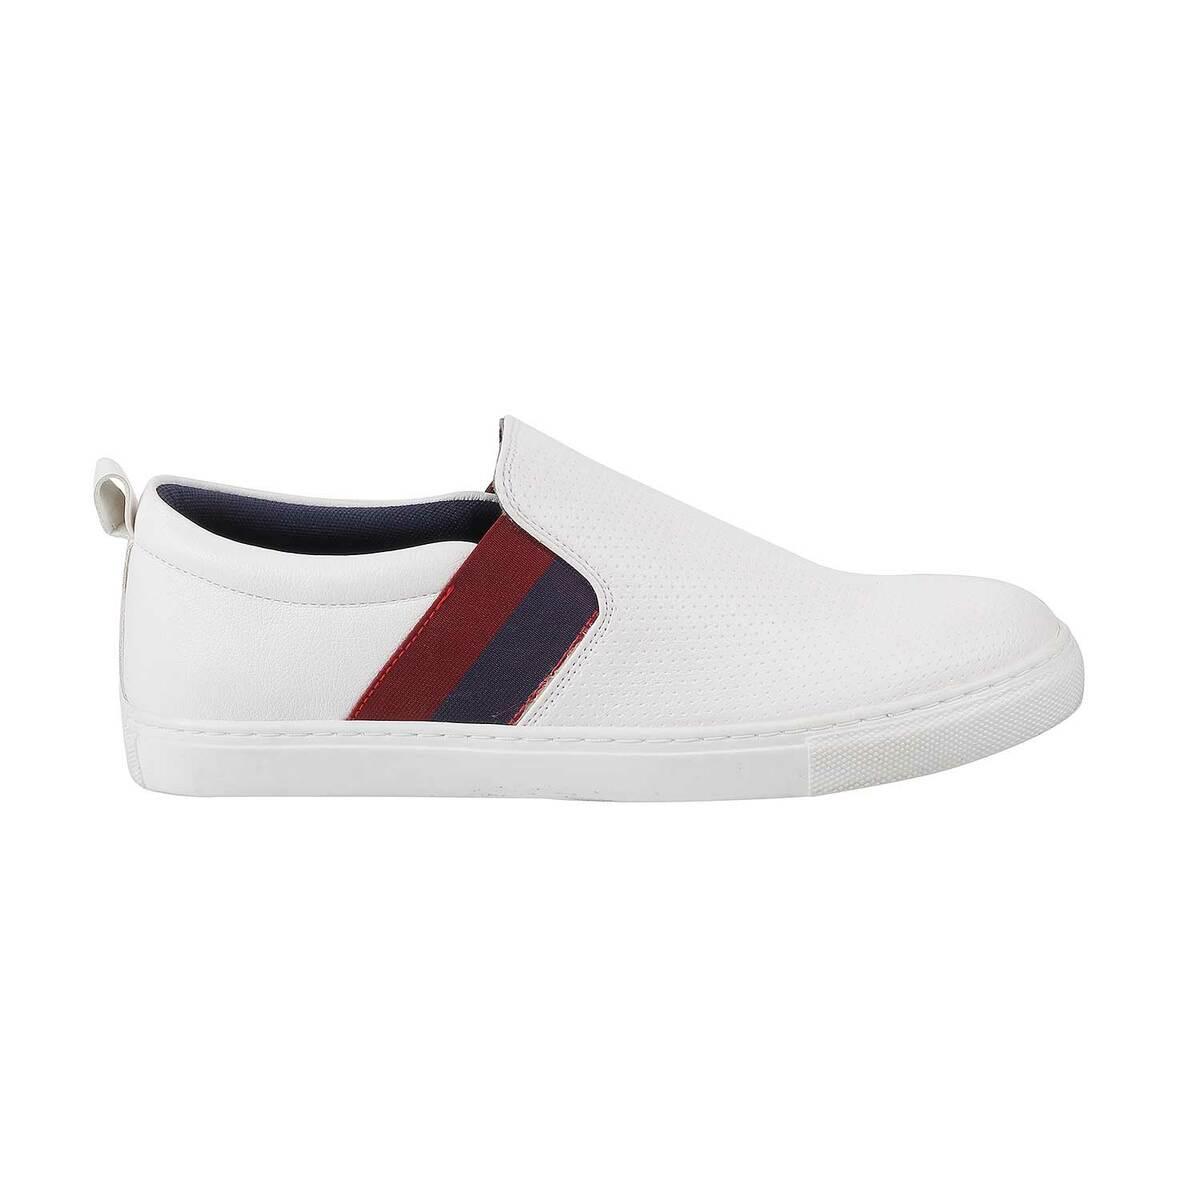 Woox Casual Sneakers White Shoes For Boys And Men Sneakers For Men - Buy  Woox Casual Sneakers White Shoes For Boys And Men Sneakers For Men Online  at Best Price - Shop